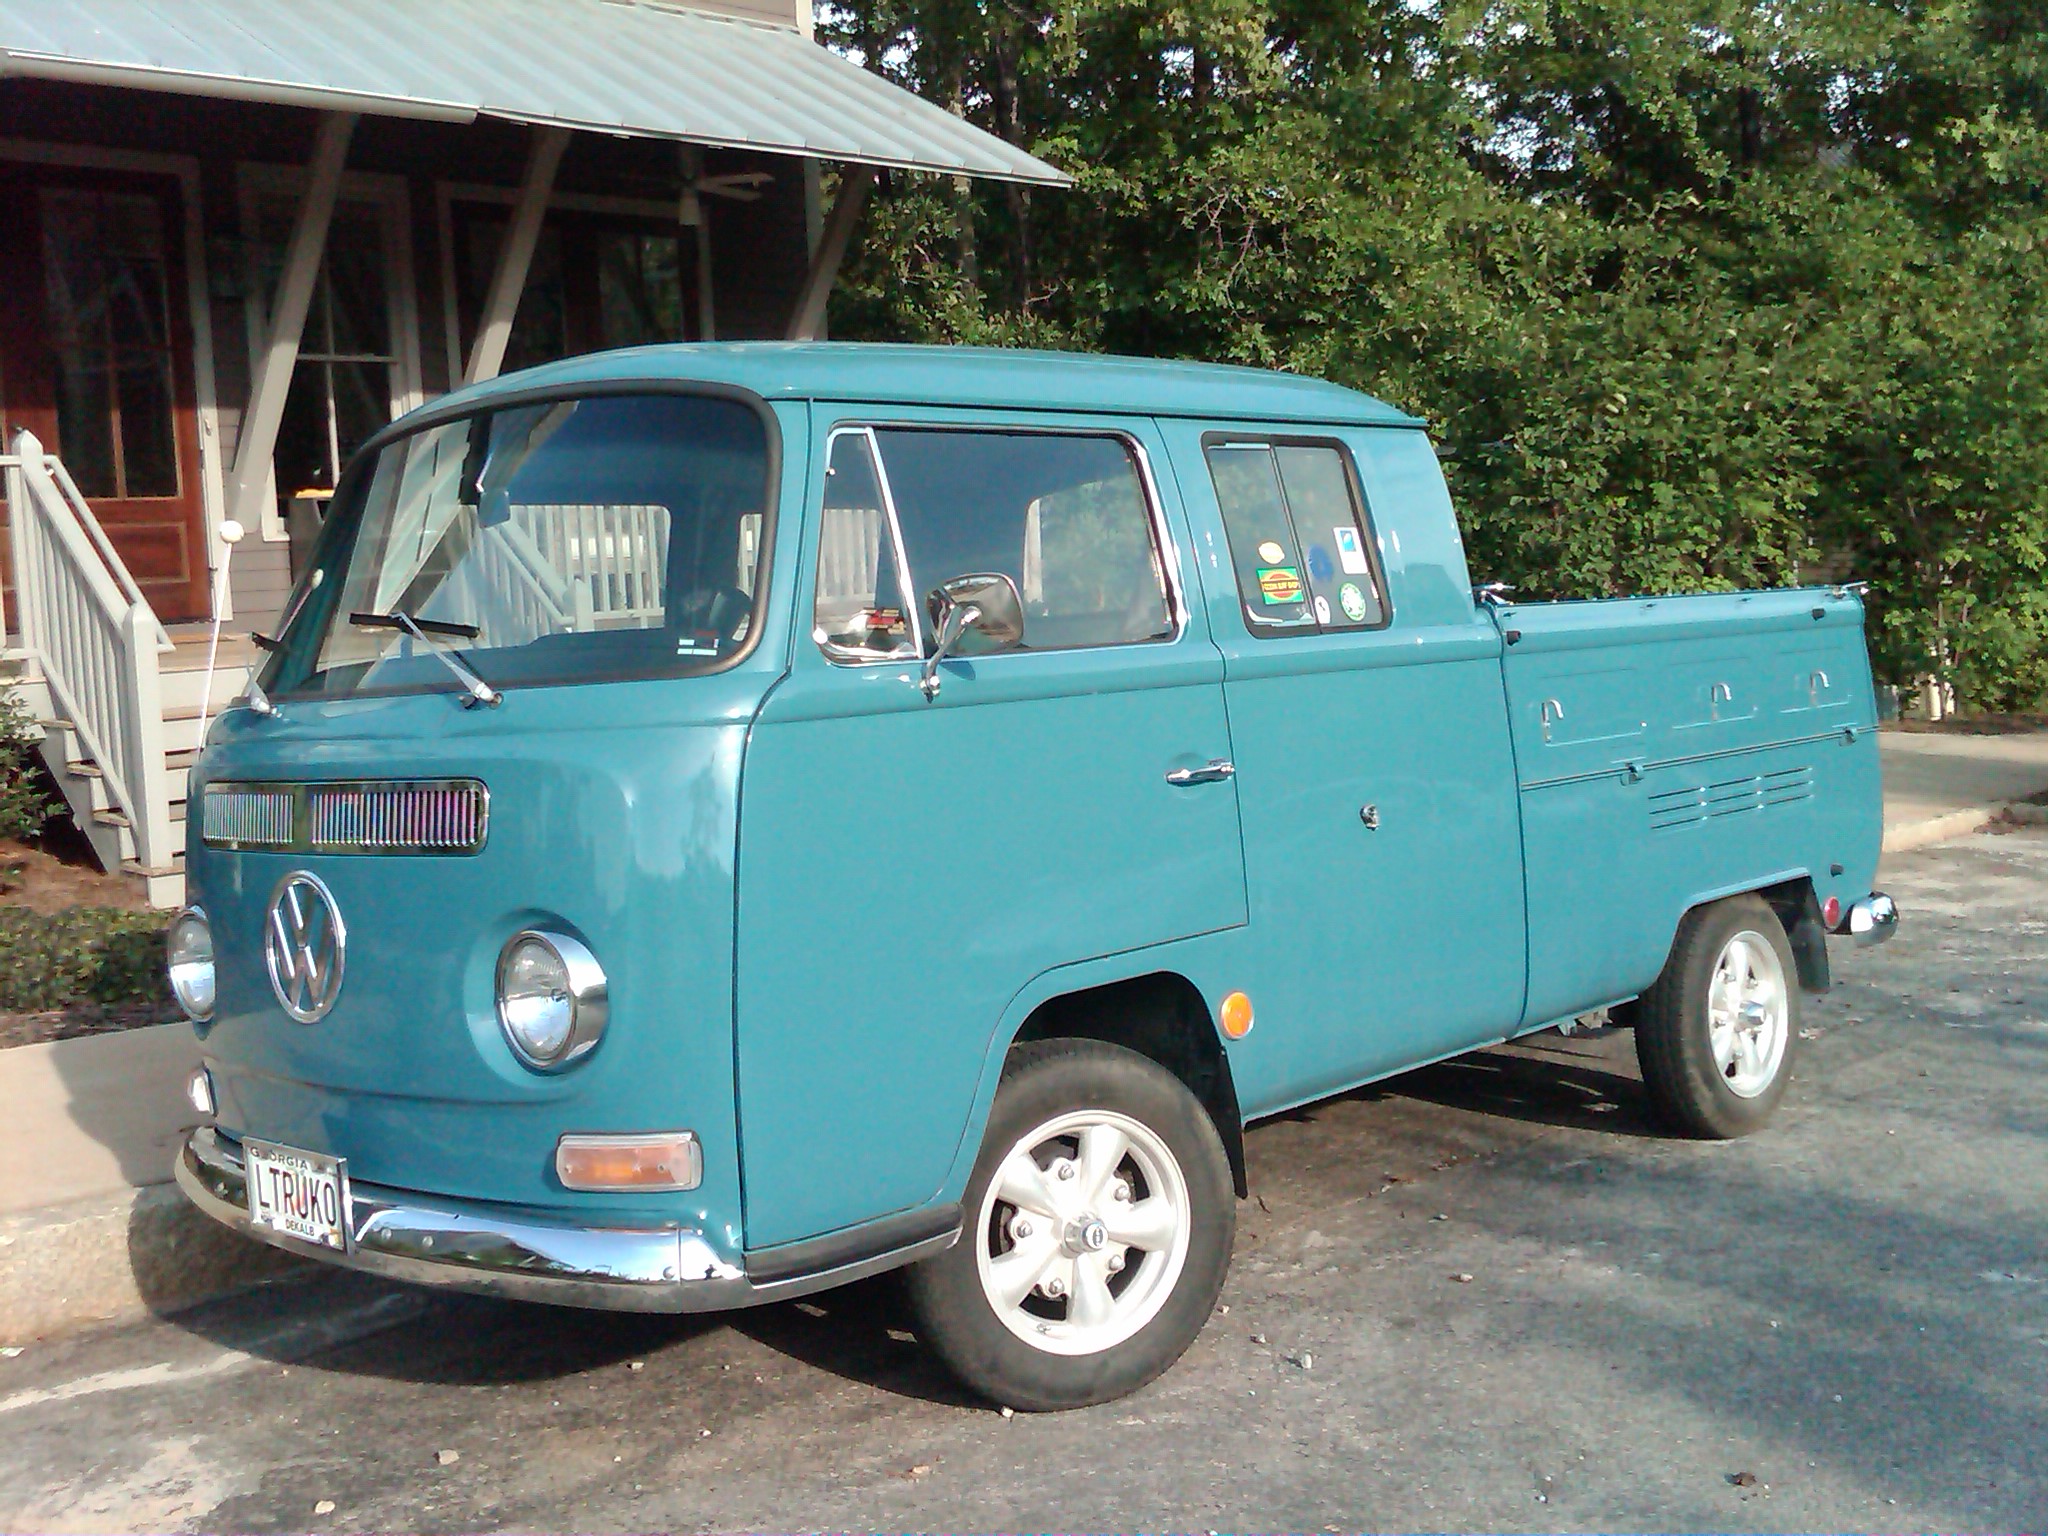 For those of us who don't reside on the west coast, Volkswagen Type 2 pickup